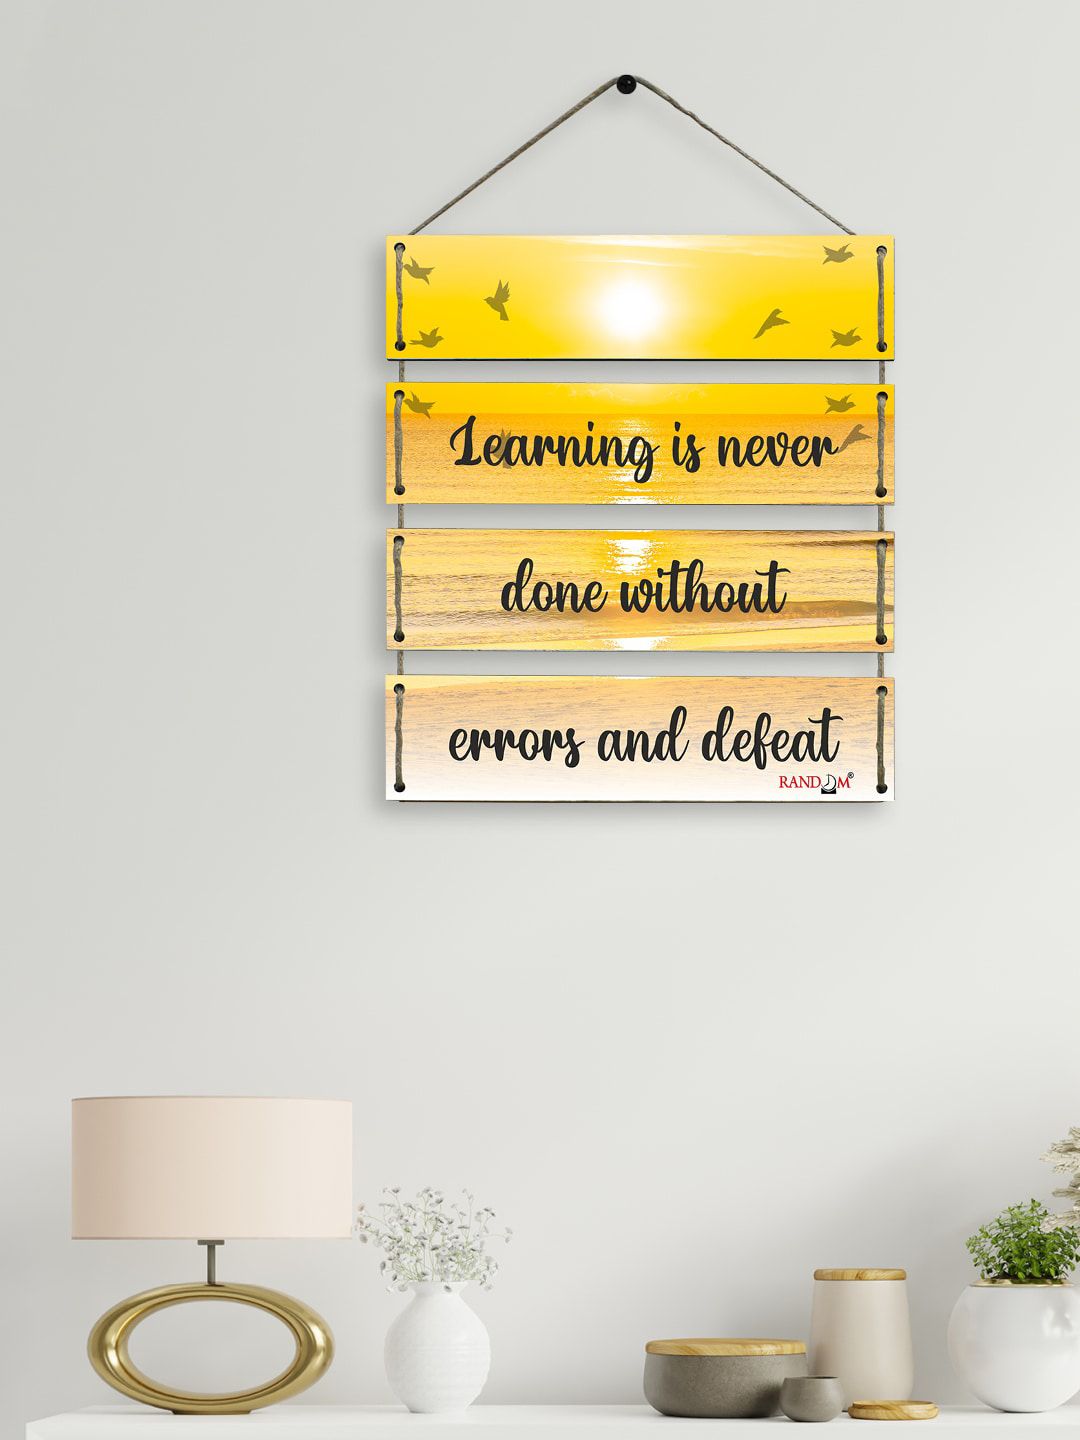 RANDOM Set Of 4 Yellow & Black MDF Wooden Random Motivational Quotes Hanging Wall Decor Price in India